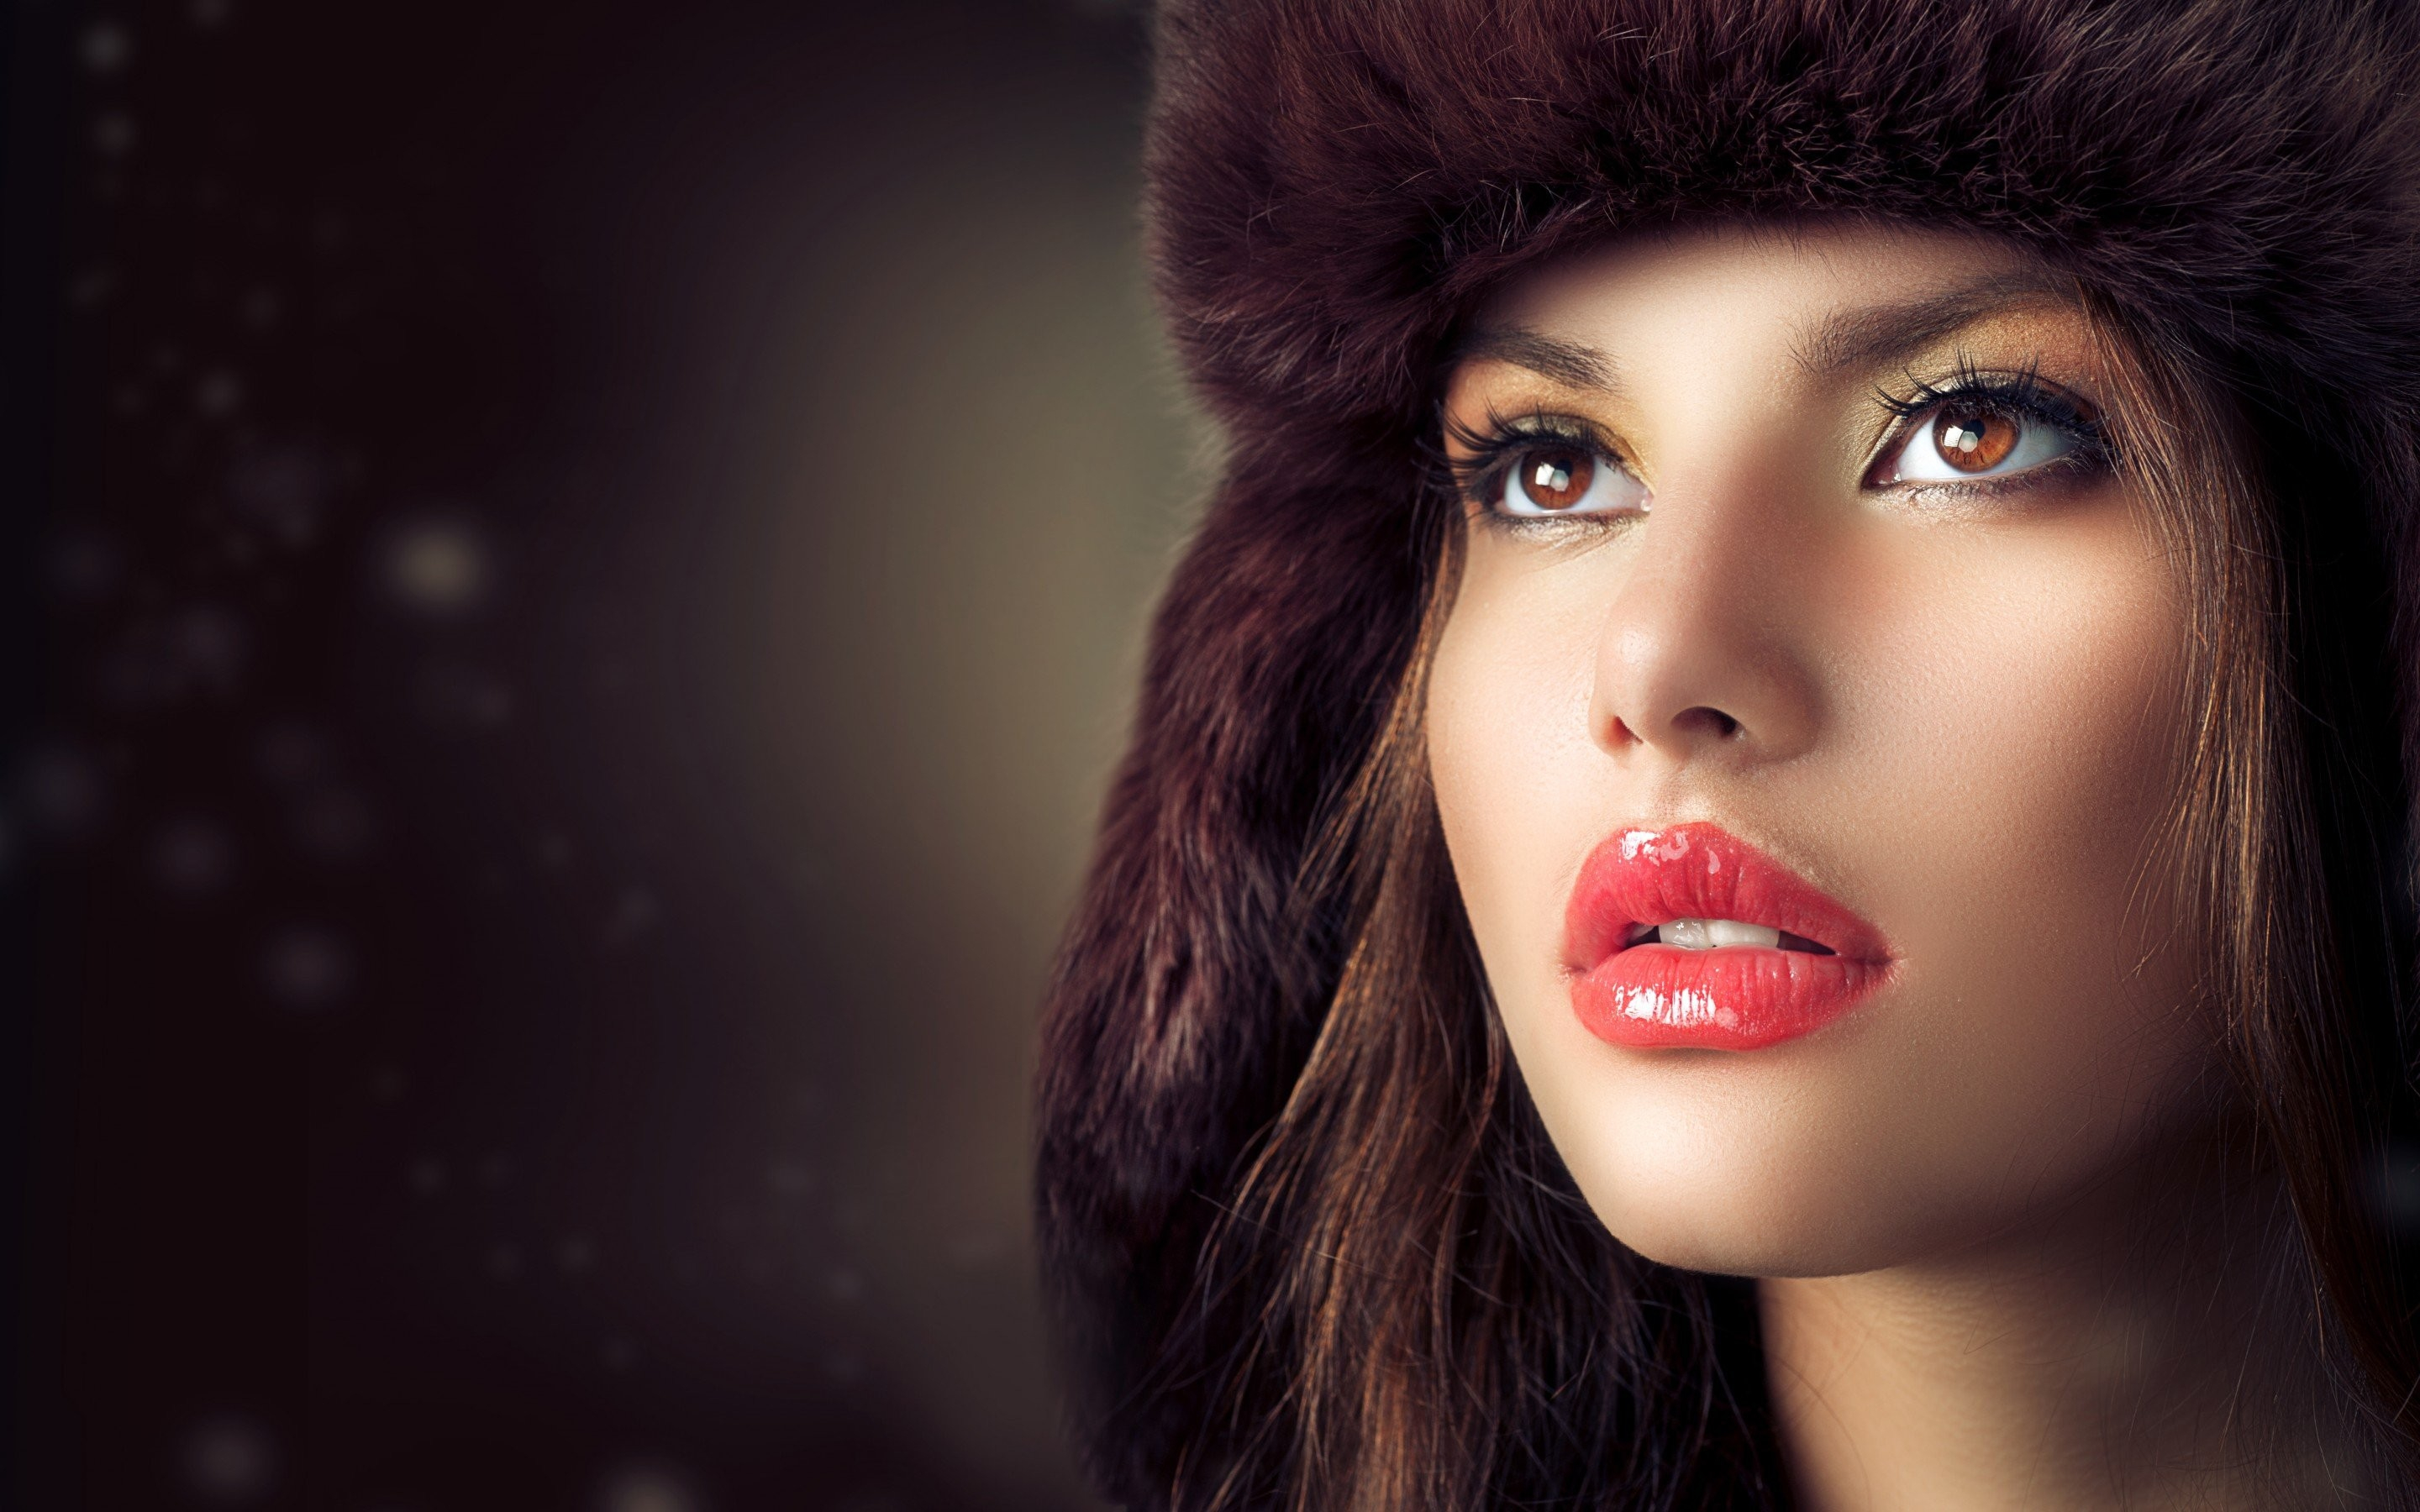 2880x1800 Wallpaper : face, black, women, model, long hair, brunette, open mouth, hat, red lipstick, brown eyes, fashion, juicy lips, fur, nose, skin, head, airbrushed, funny hats, color, girl, beauty, eye, lady, darkness